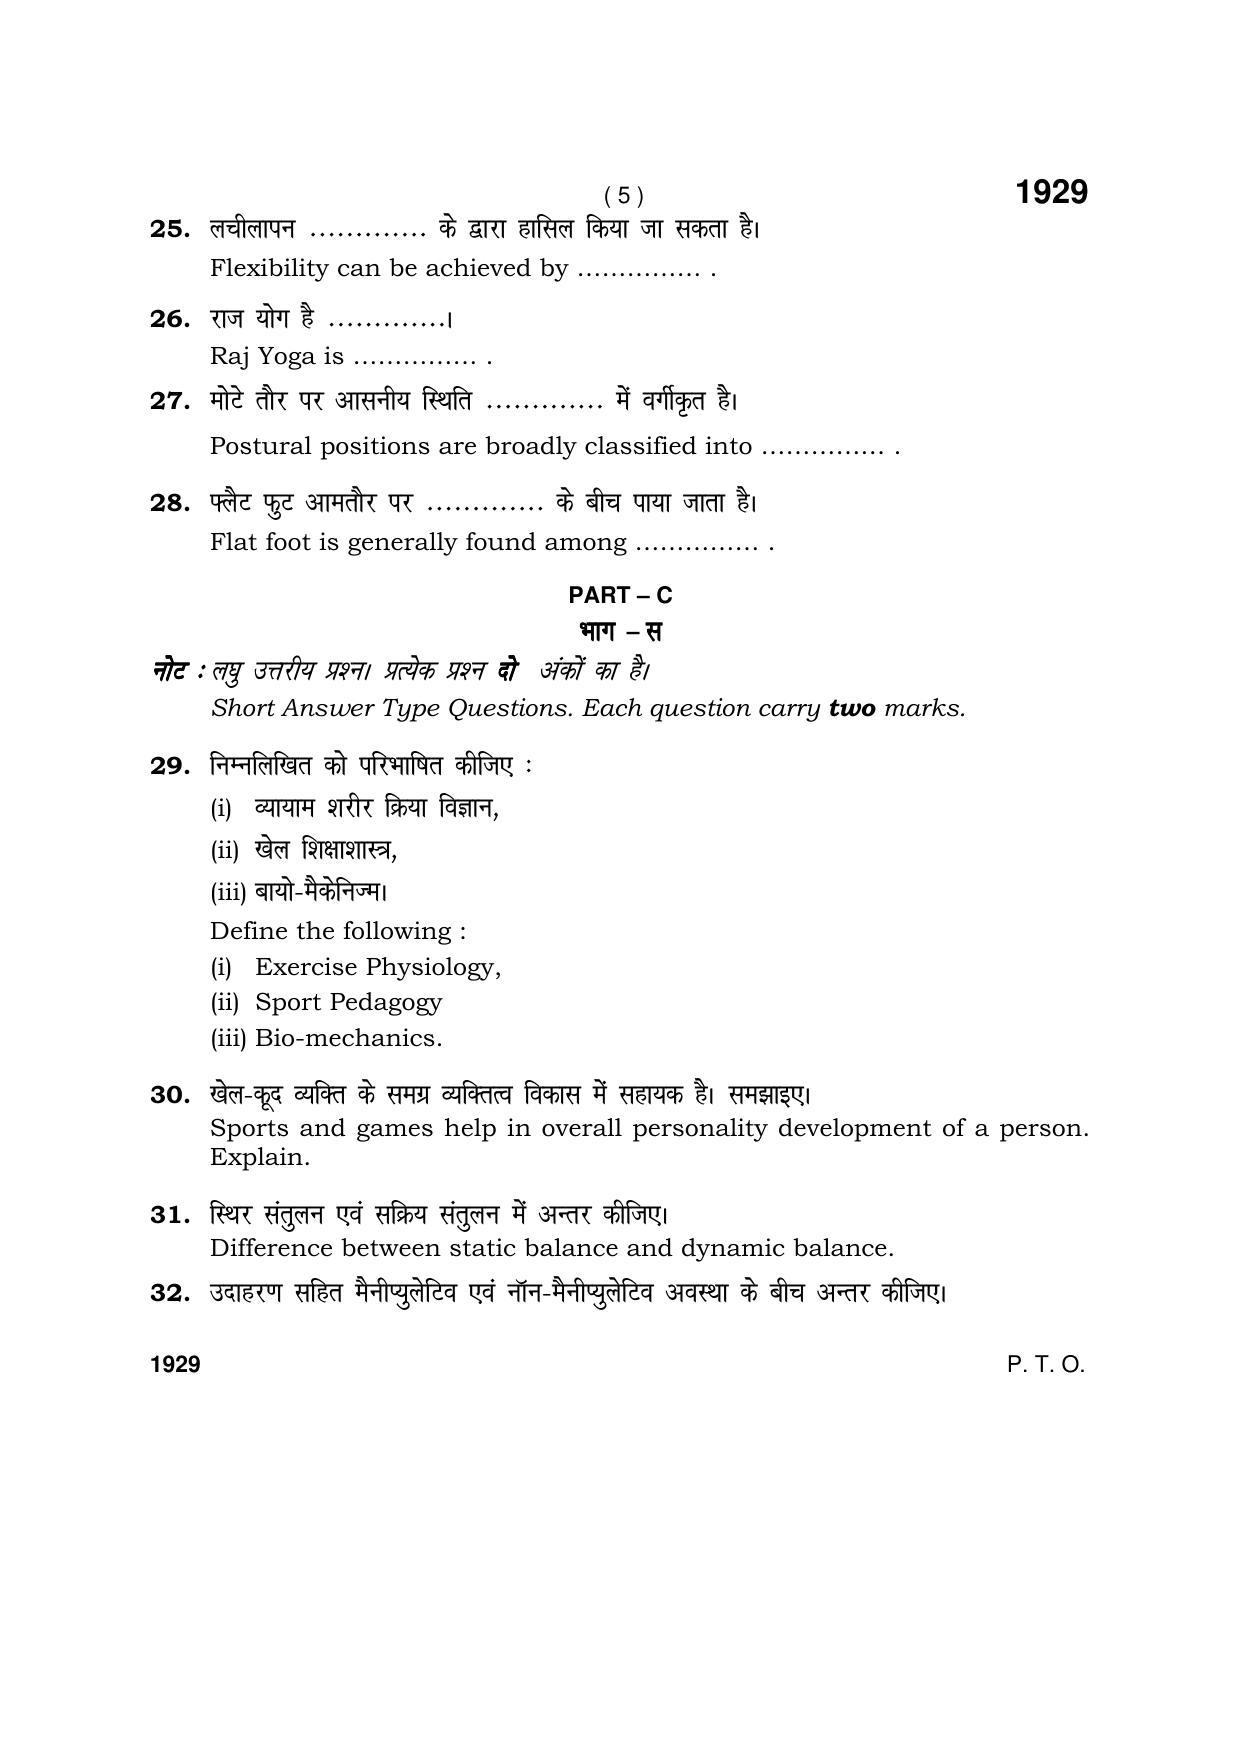 Haryana Board HBSE Class 10 Physical Education & Sport 2017 Question Paper - Page 5